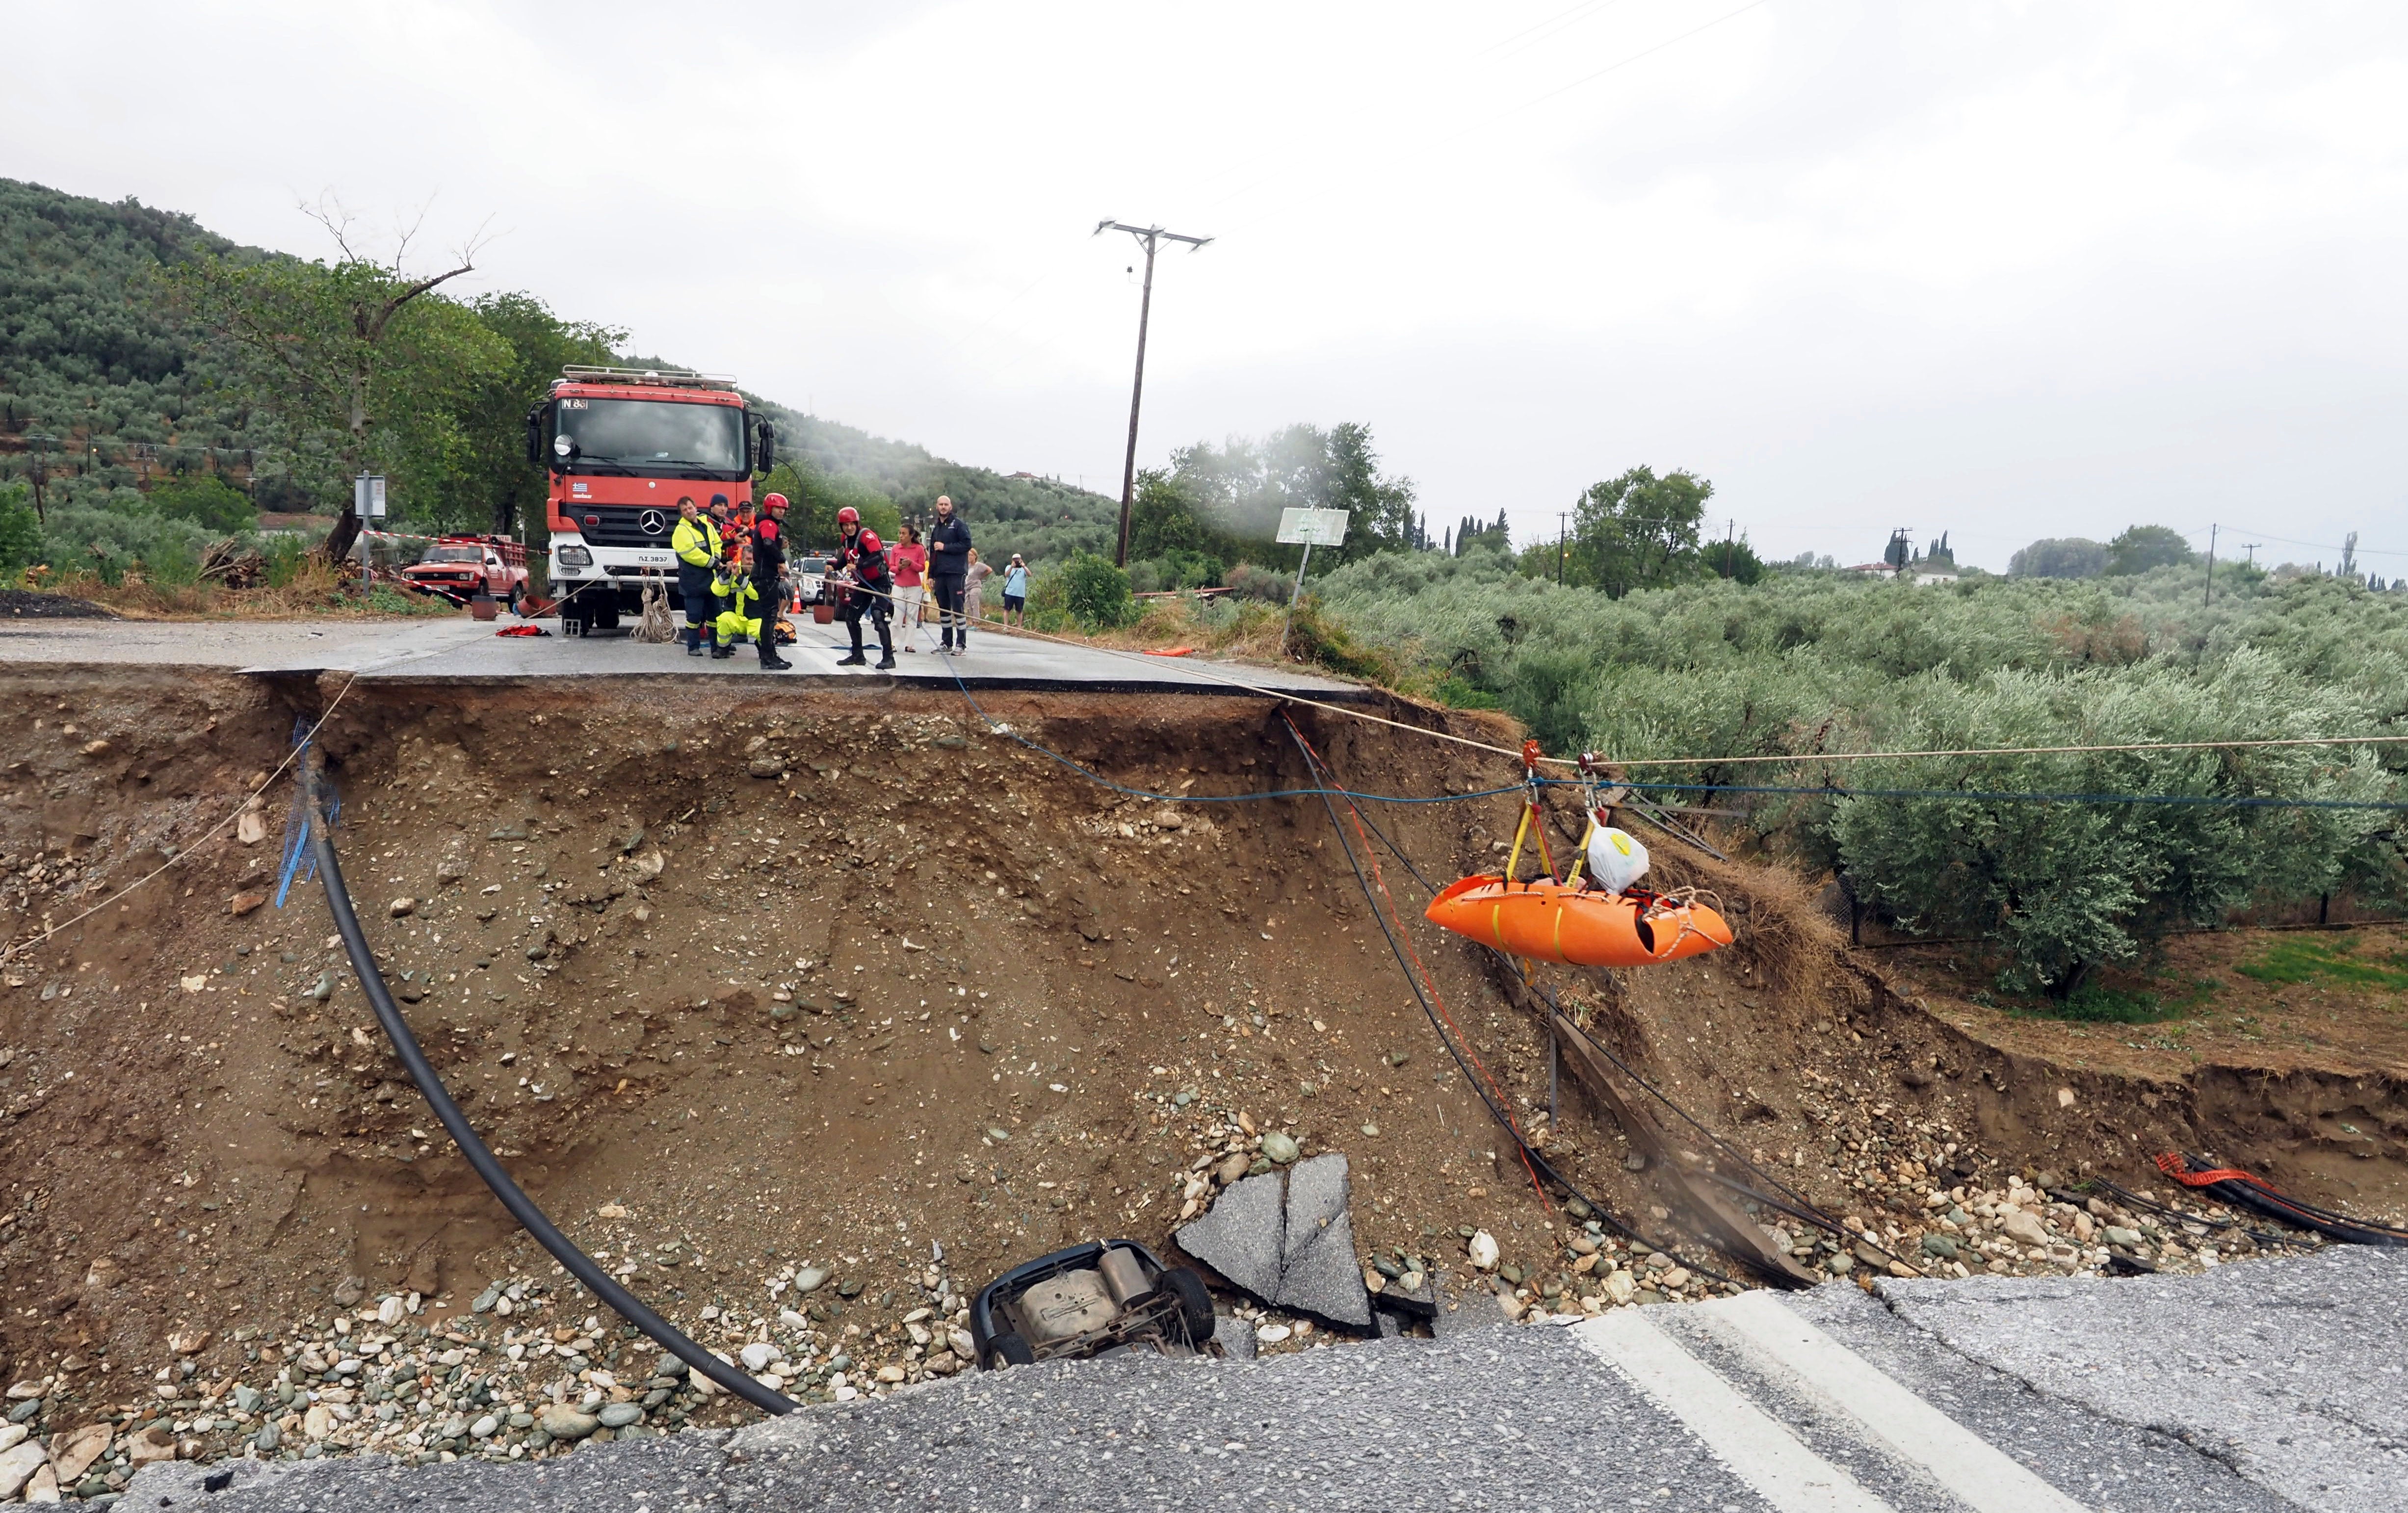 Firefighters use ropes to lift a kidney patient in a stretcher across a road damaged by a rainstorm in Kala Nera village, near Volos